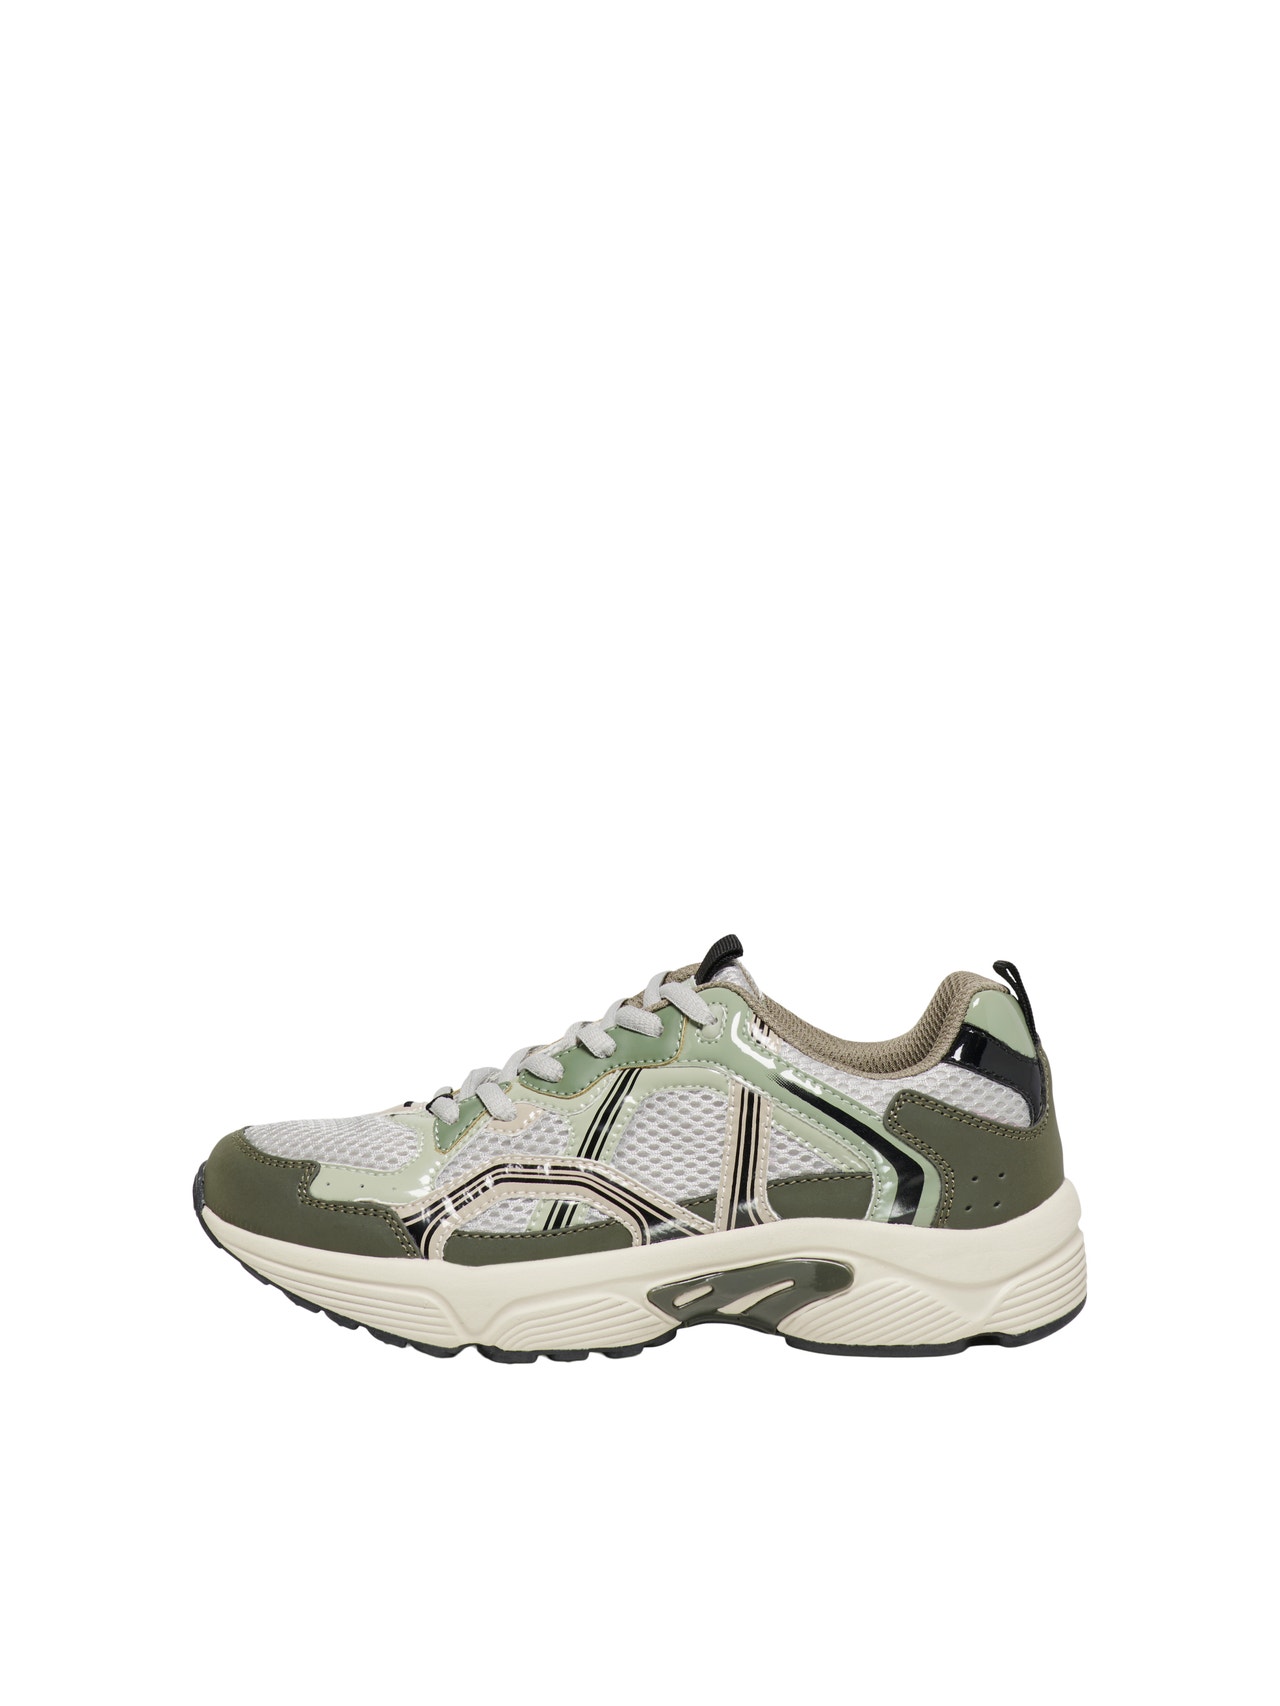 ONLY Contrast color Sneaker -Sea Moss - 15304407